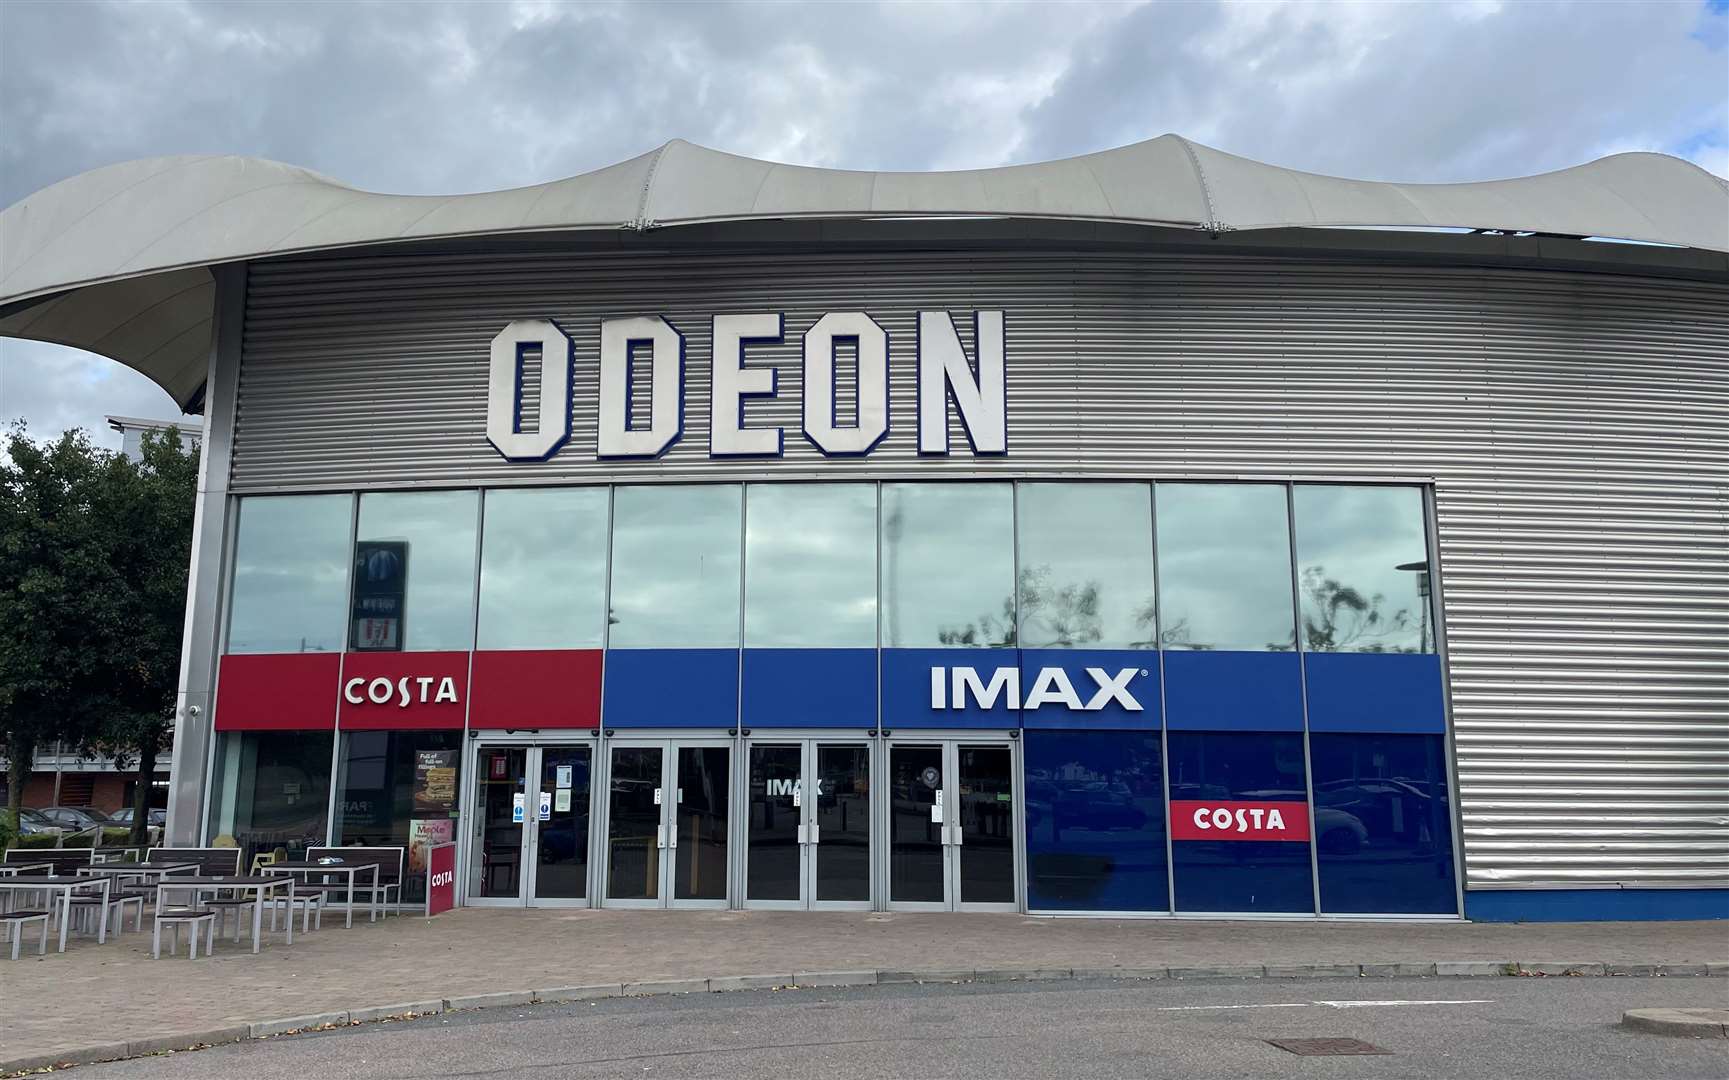 The Odeon cinema at Chatham Dockside where the rat was reportedly spotted